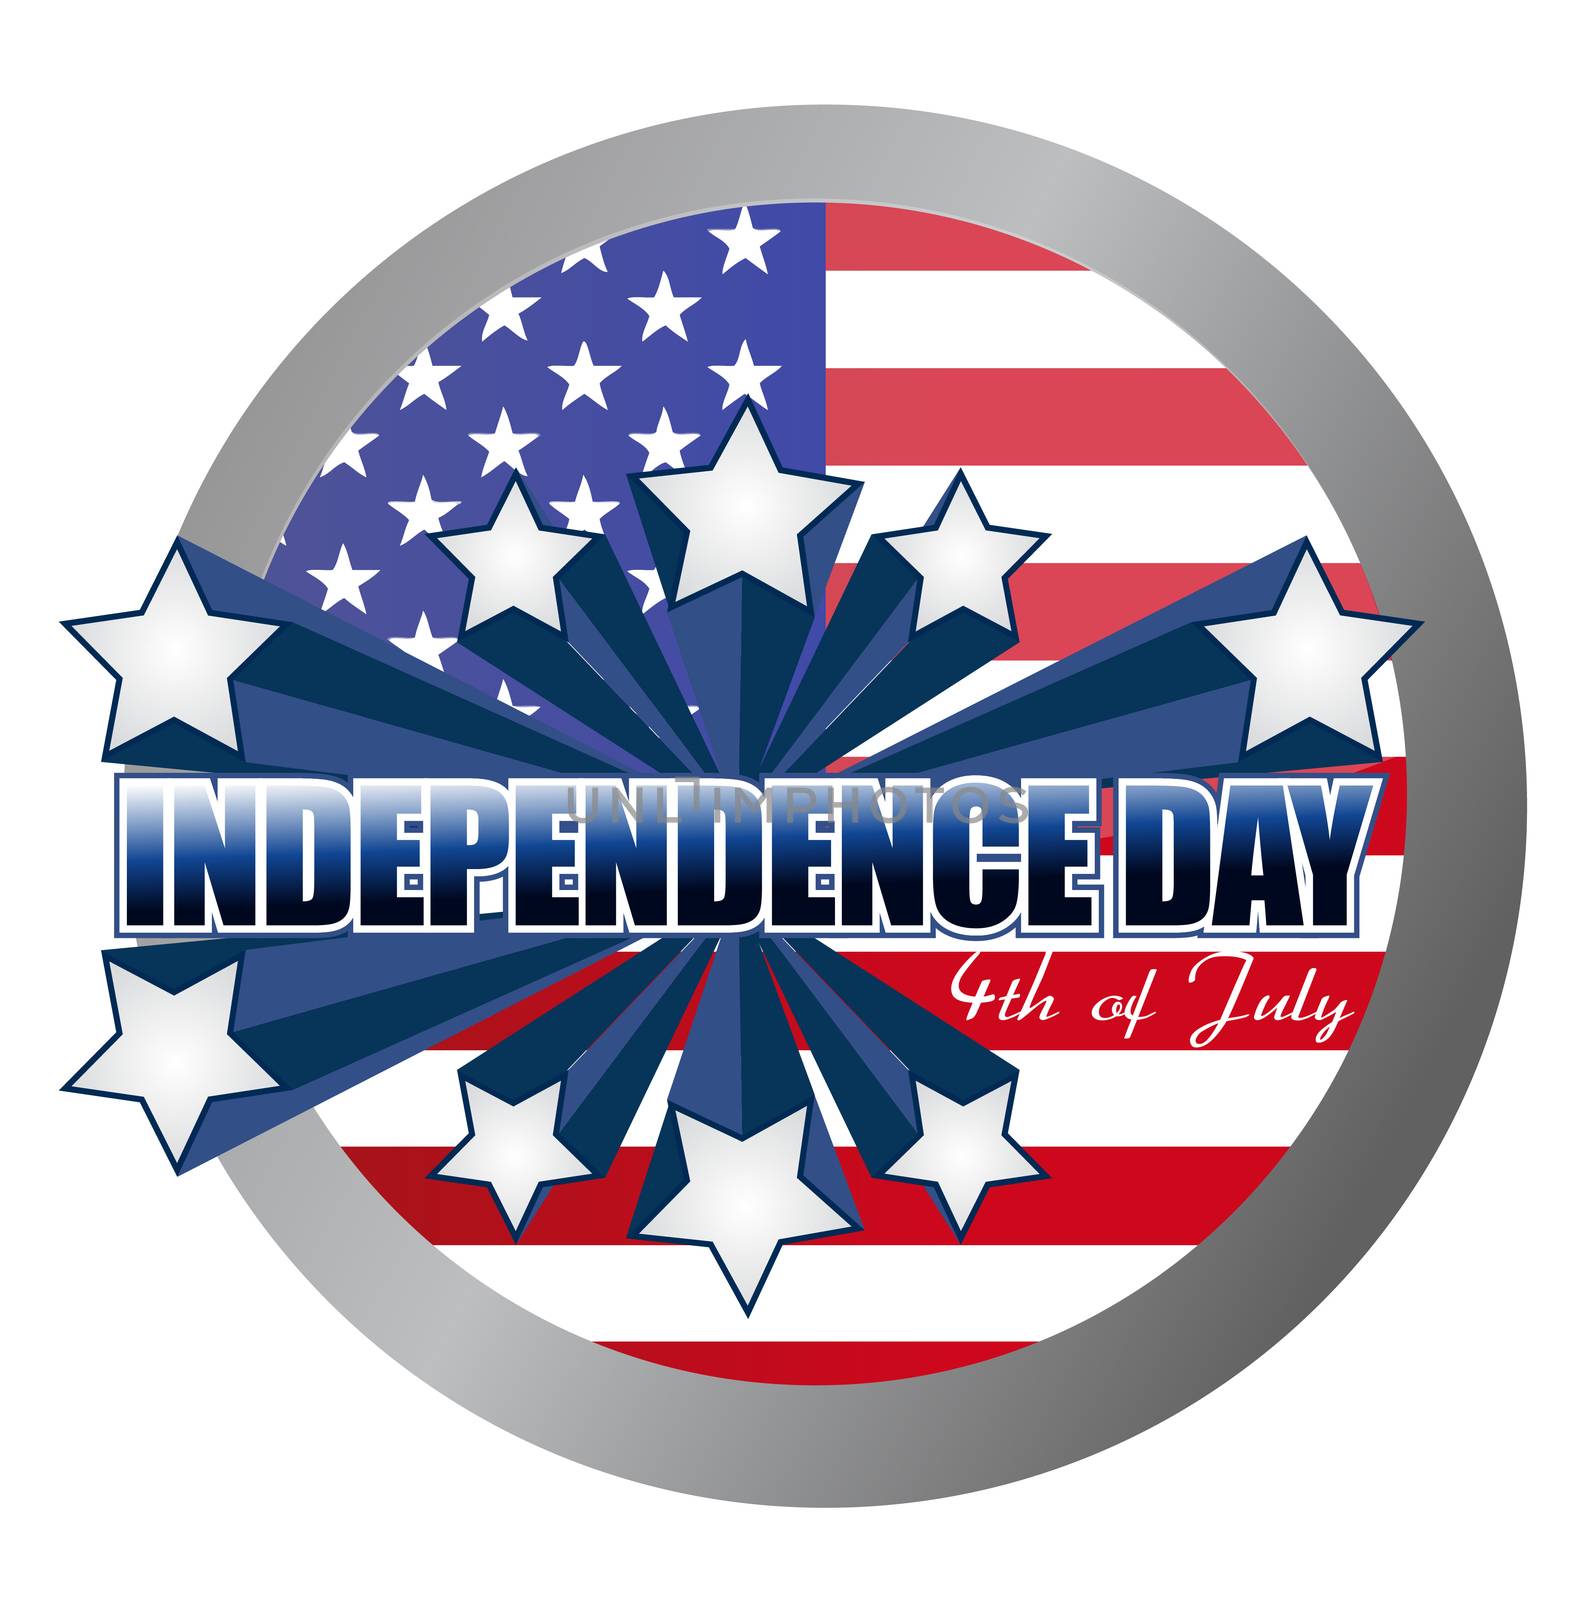 4th of july independence day seal illustration design by alexmillos